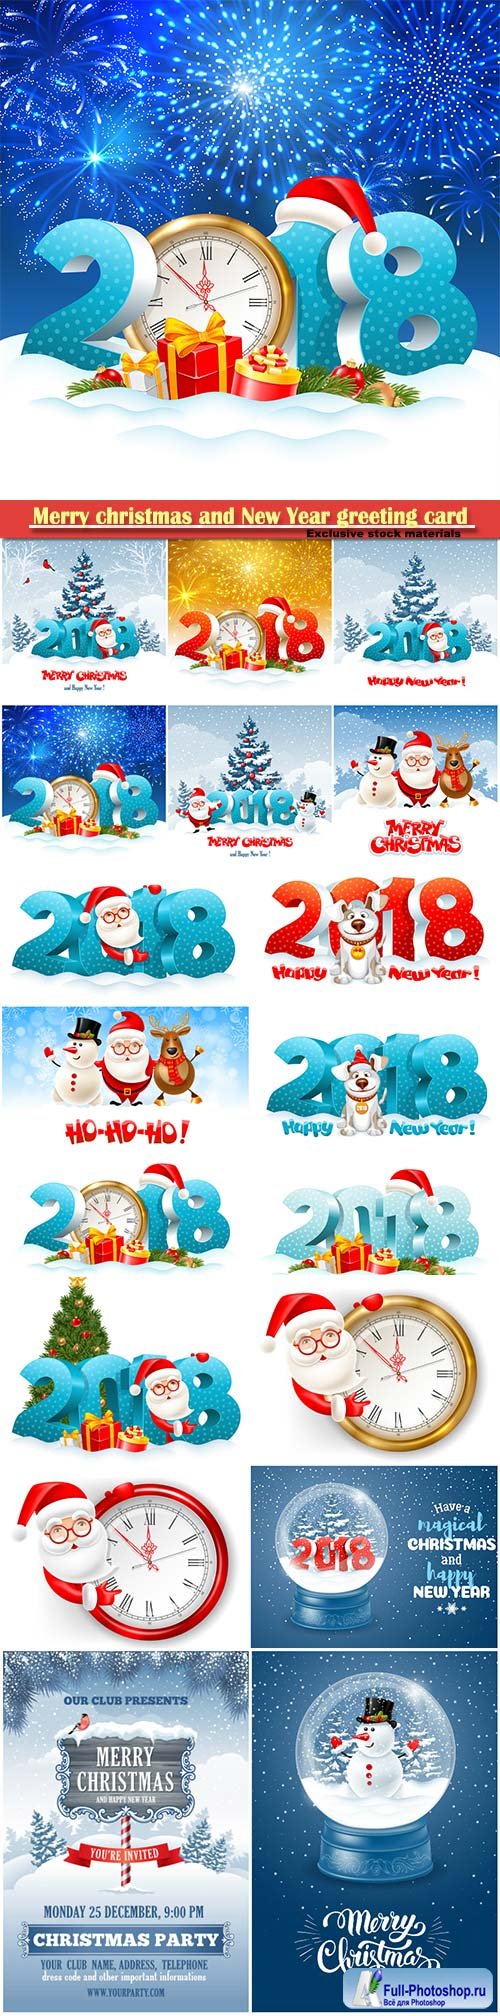 Merry christmas and New Year greeting card vector # 15